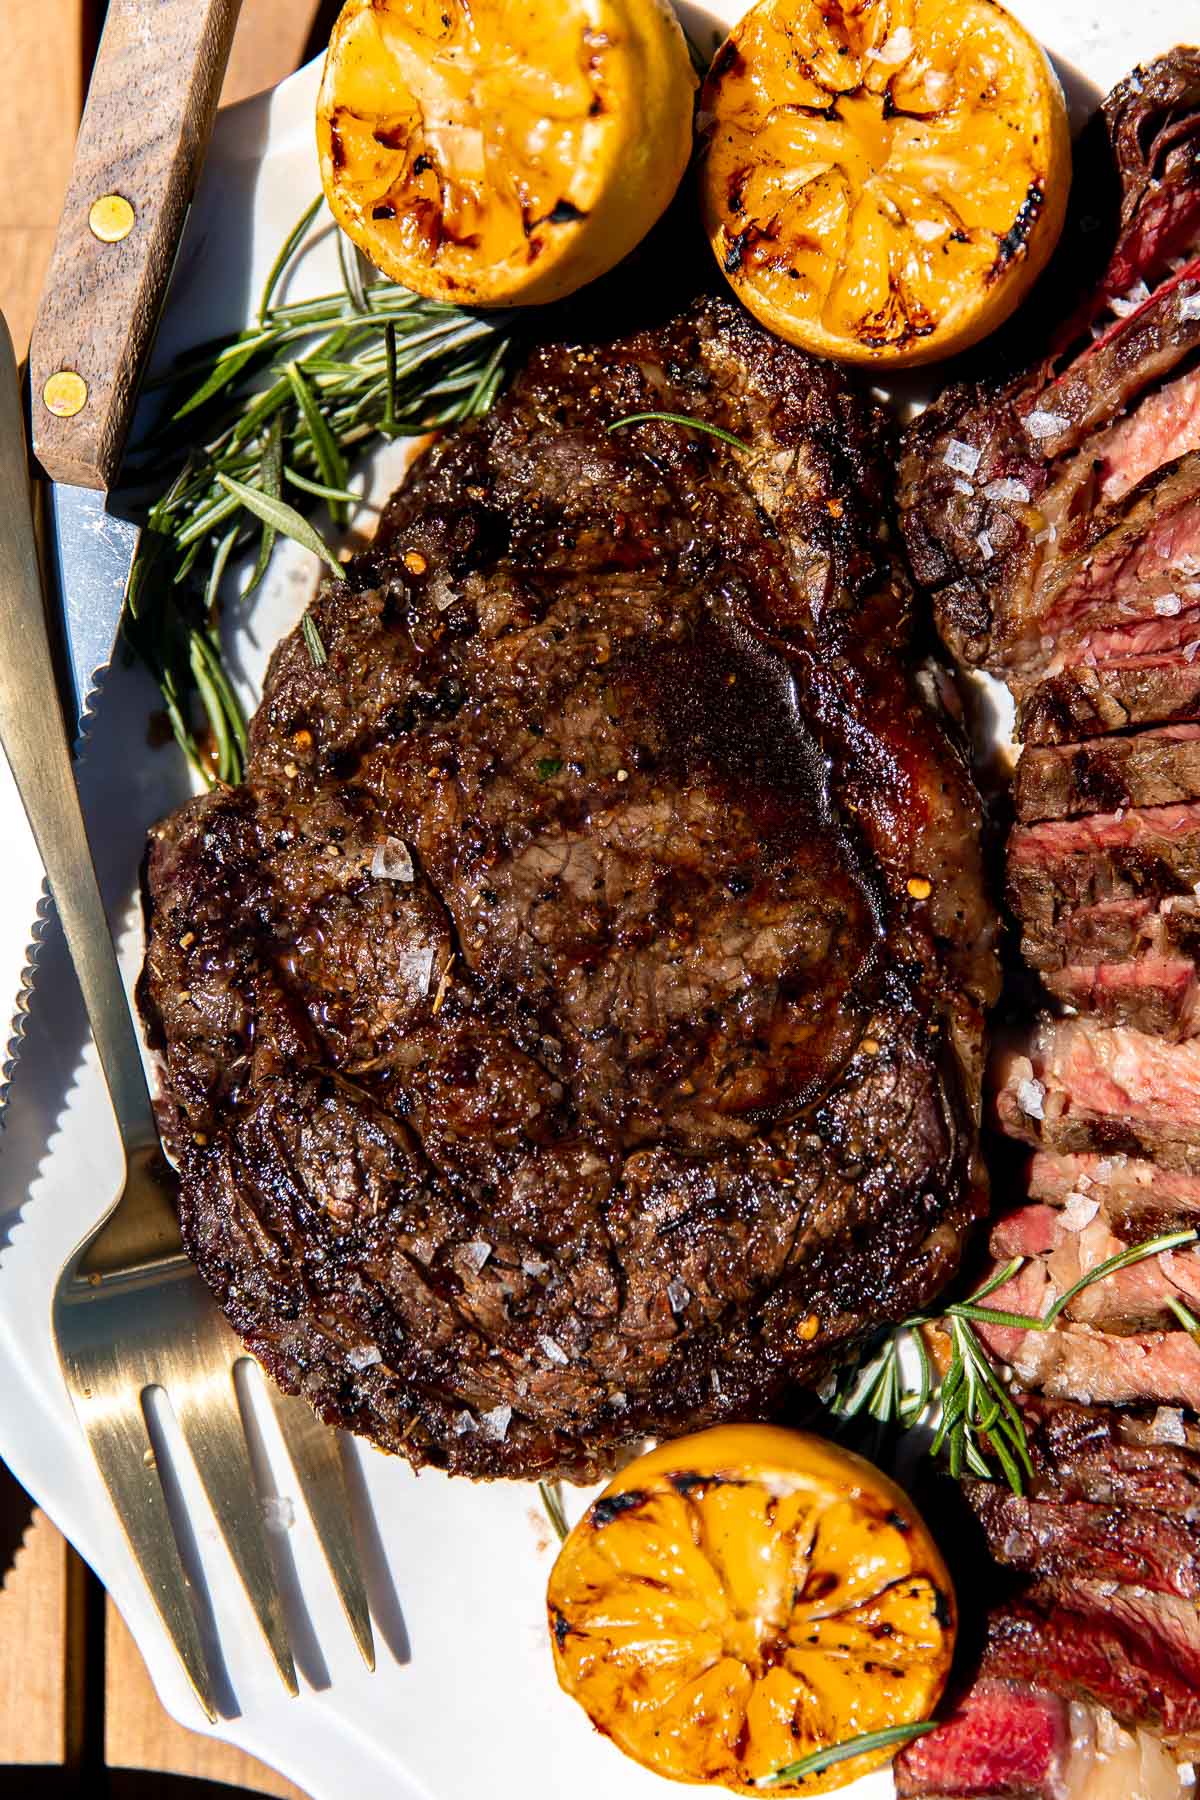 Steak Essentials: Awesome Finishing Sauce